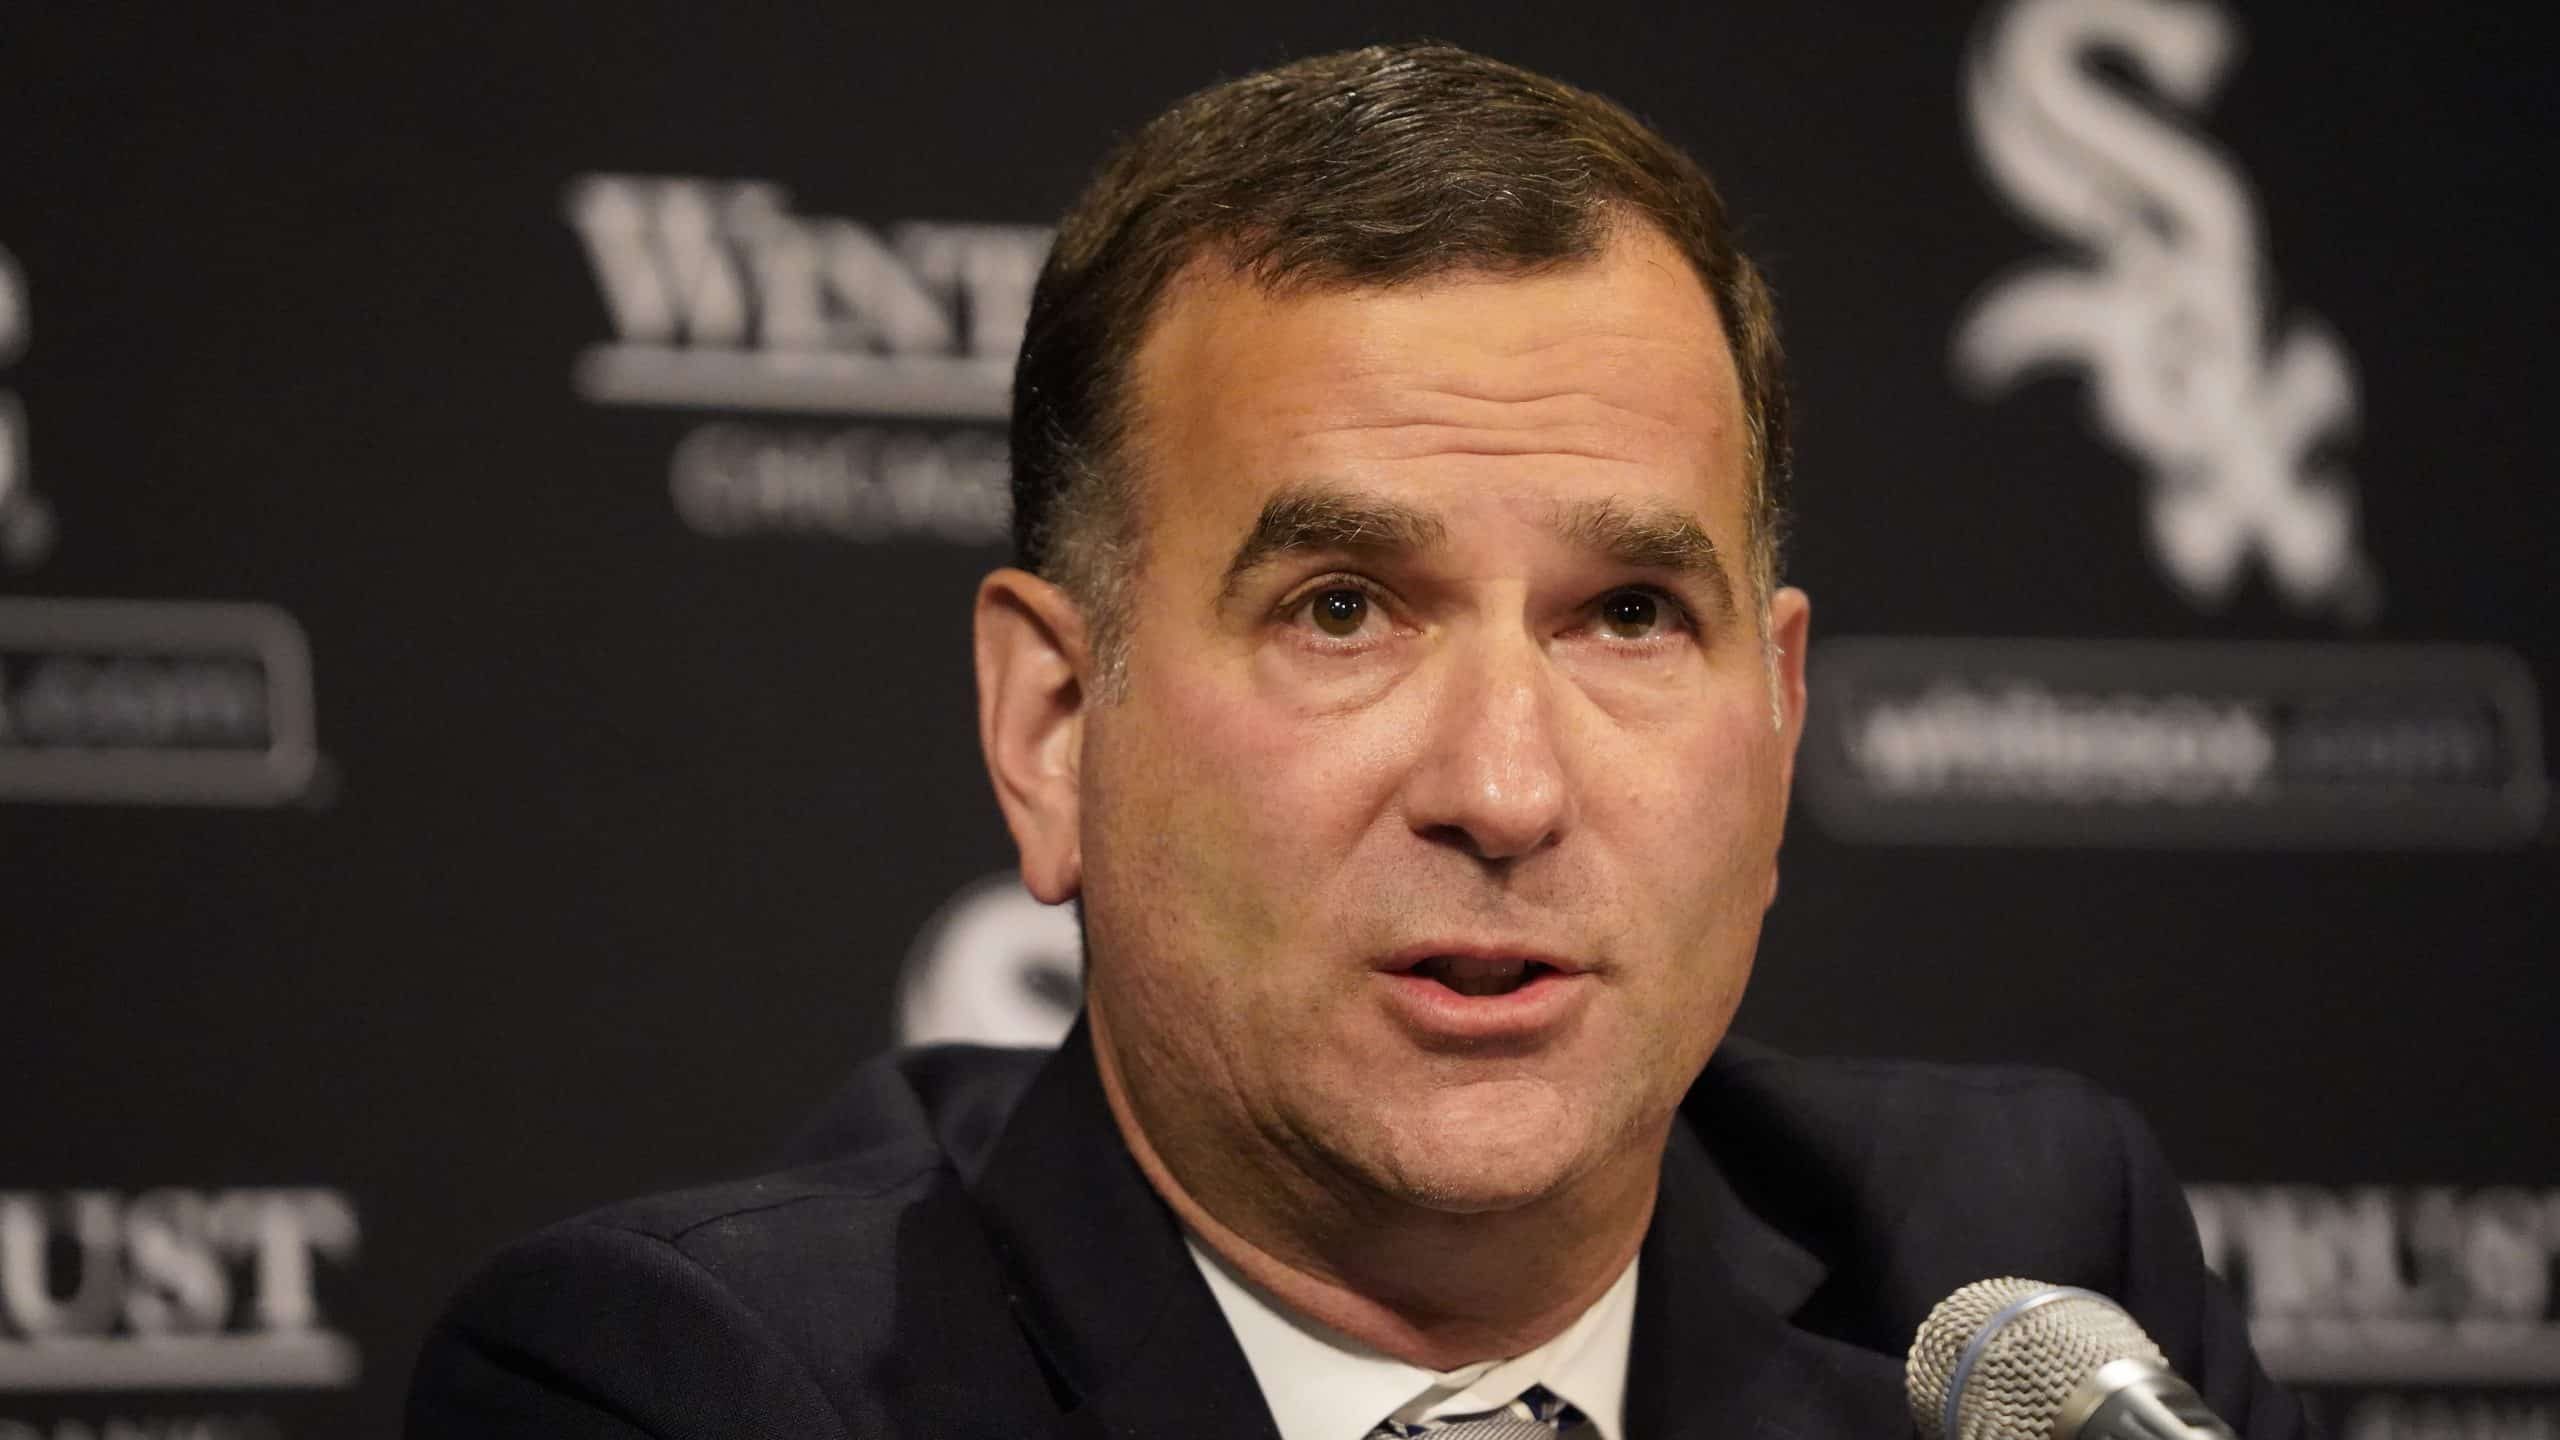 Kenny Williams, Rick Hahn release statements after firing | Sox On 35th